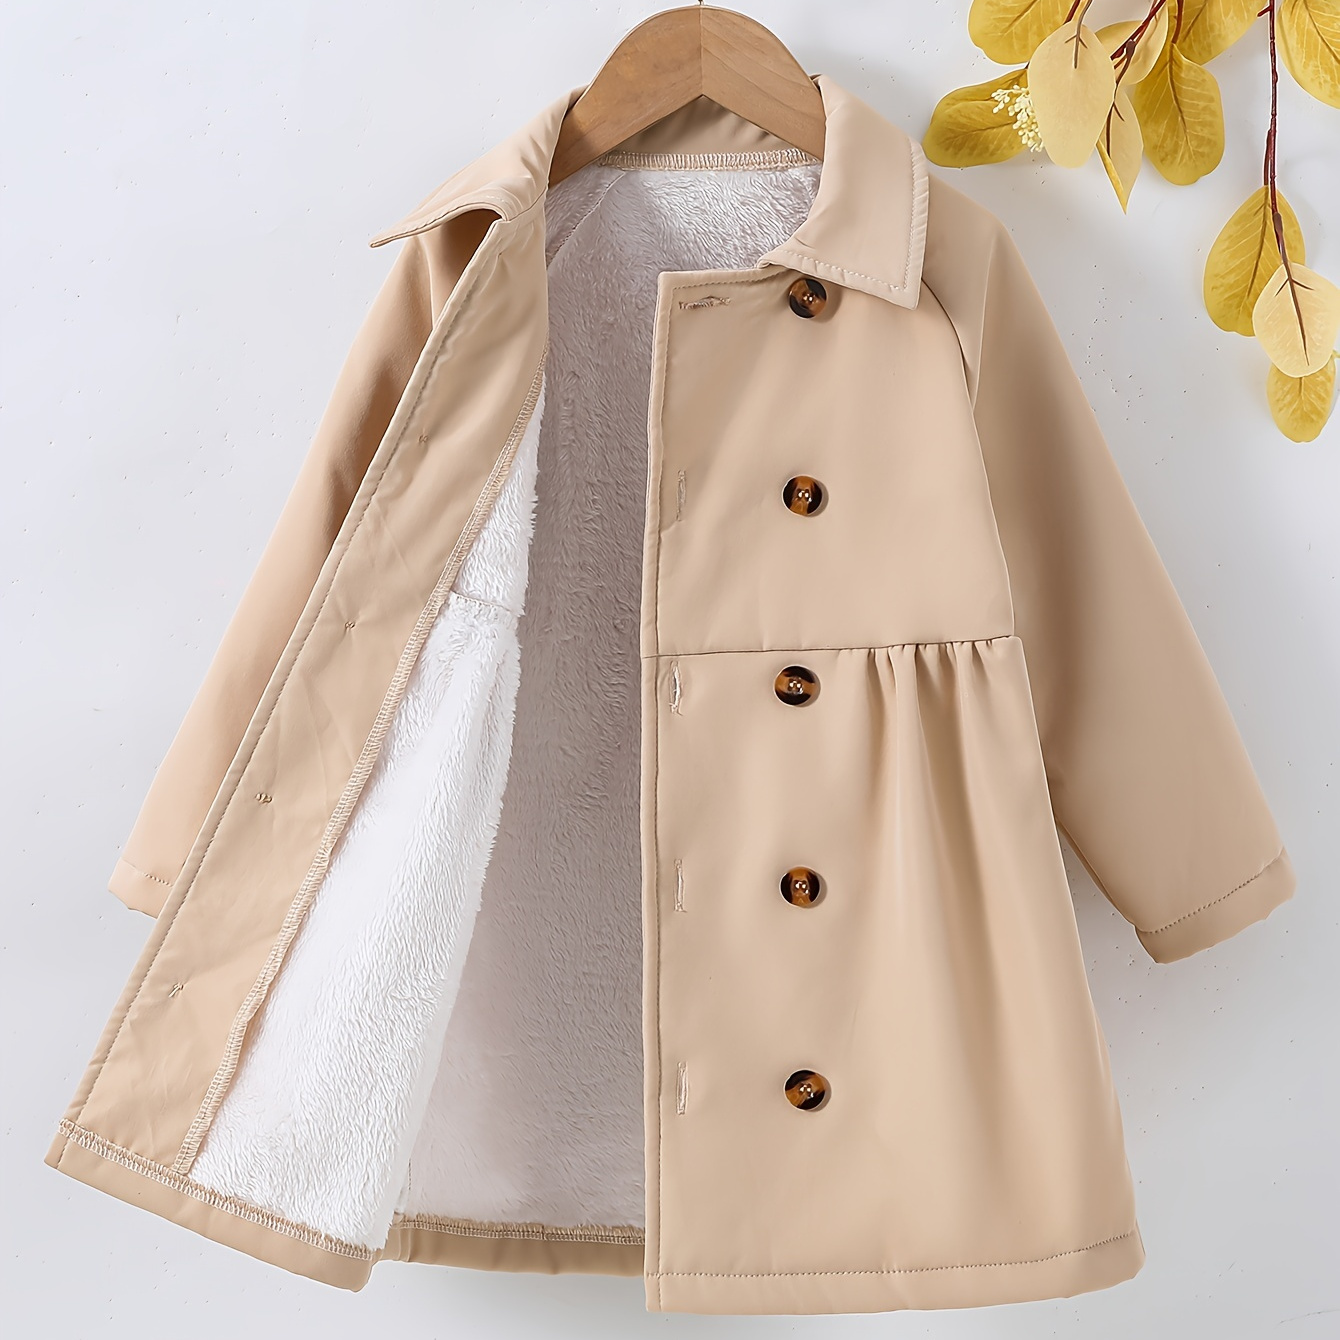 

Girls Fleece % Thick Winter Coat With Button Long Sleeve Jacket For Autumn And Winter, Everyday